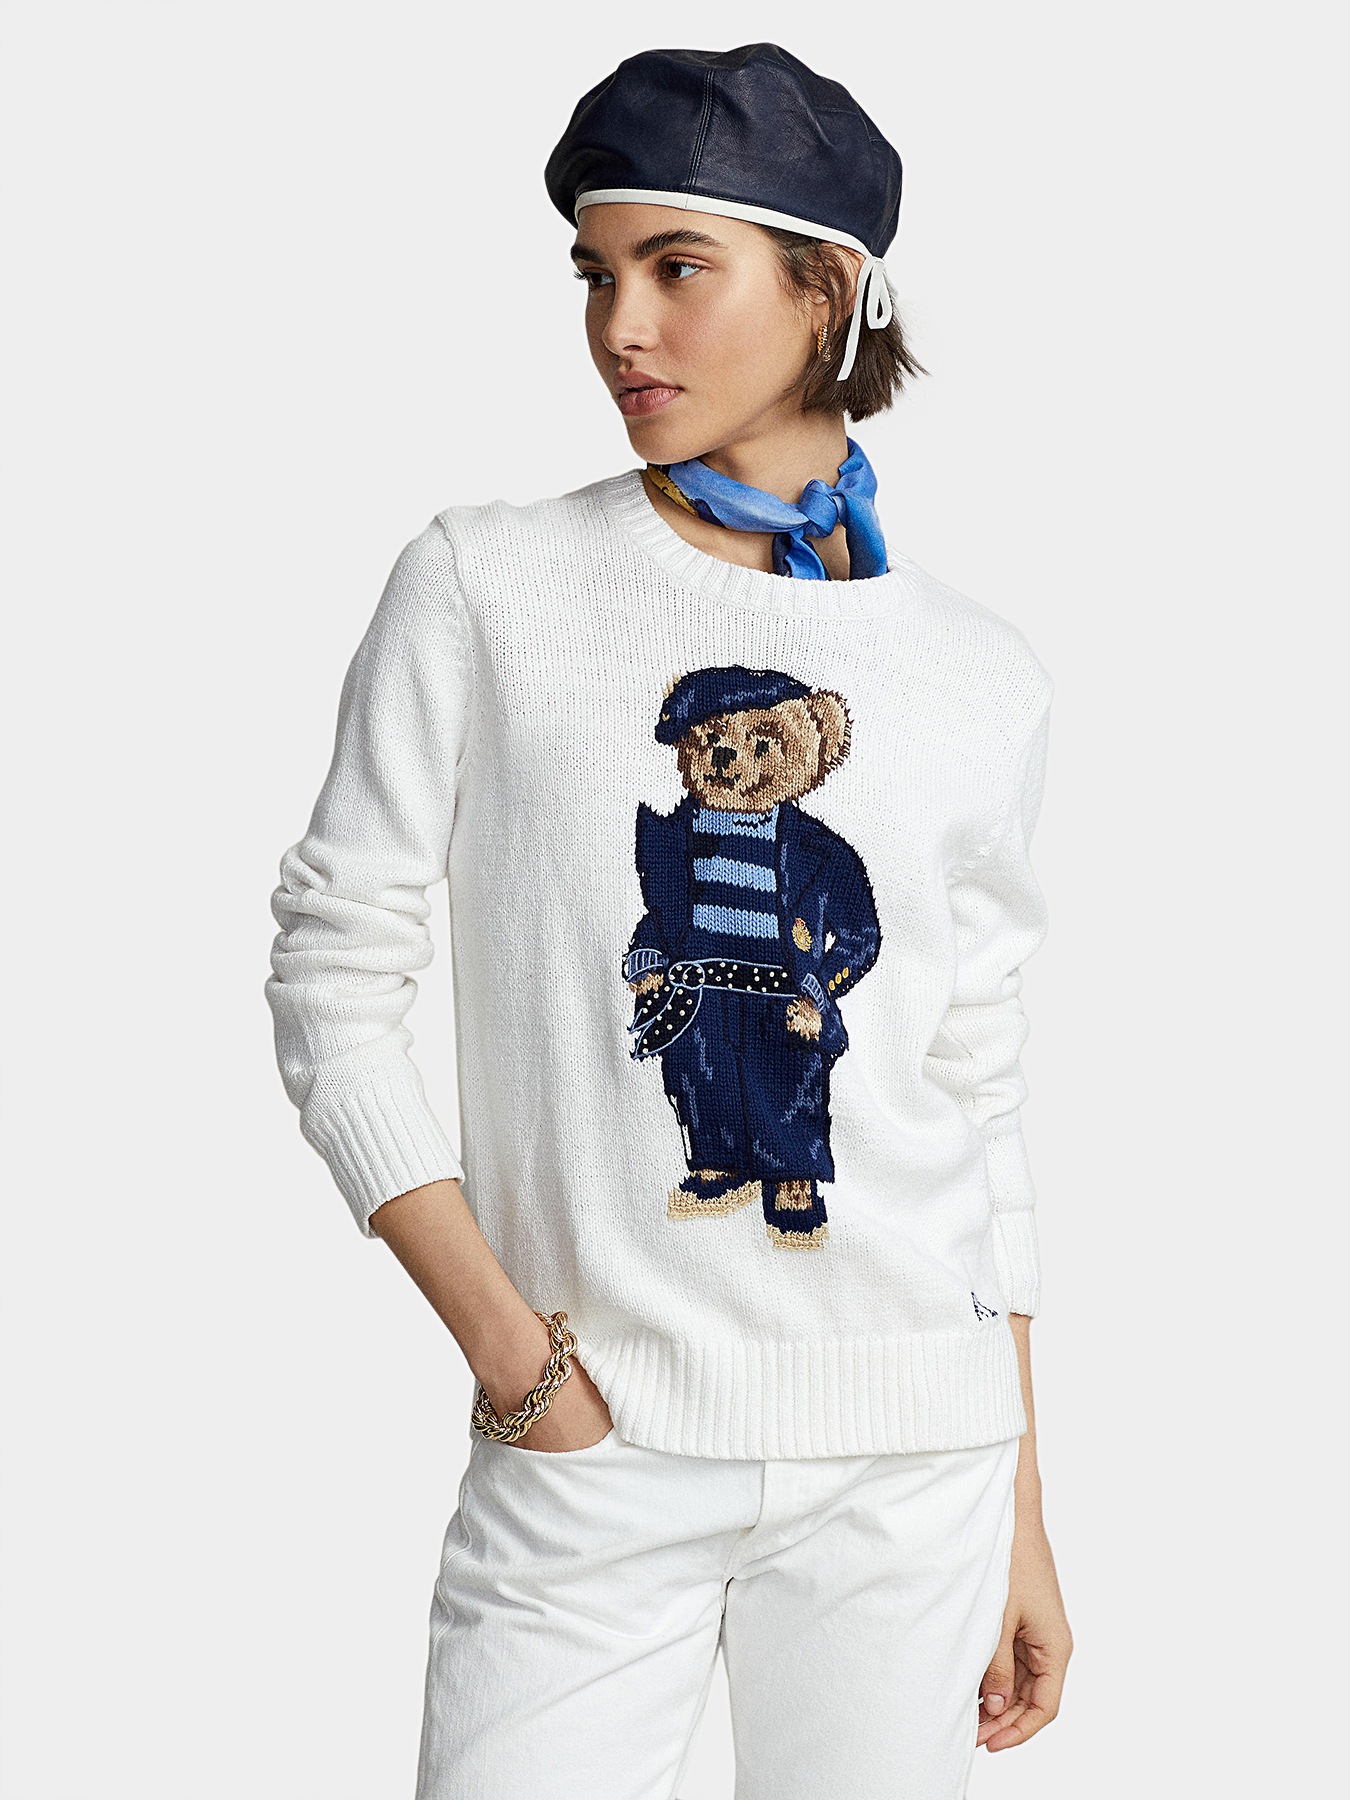 Sweater with Polo Bear accent brand POLO RALPH LAUREN —  /en